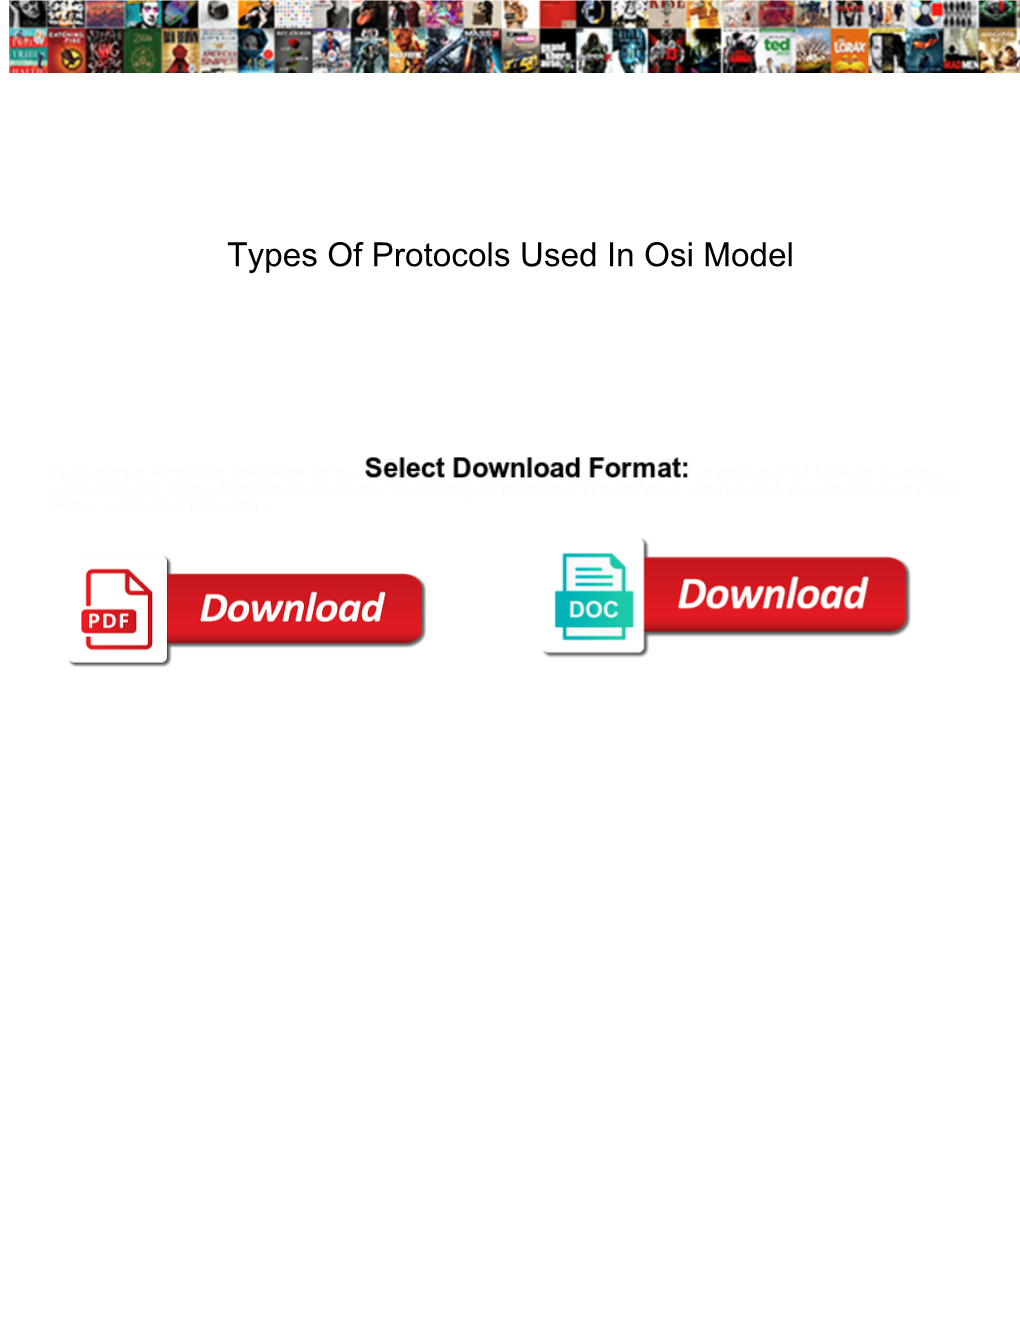 Types of Protocols Used in Osi Model